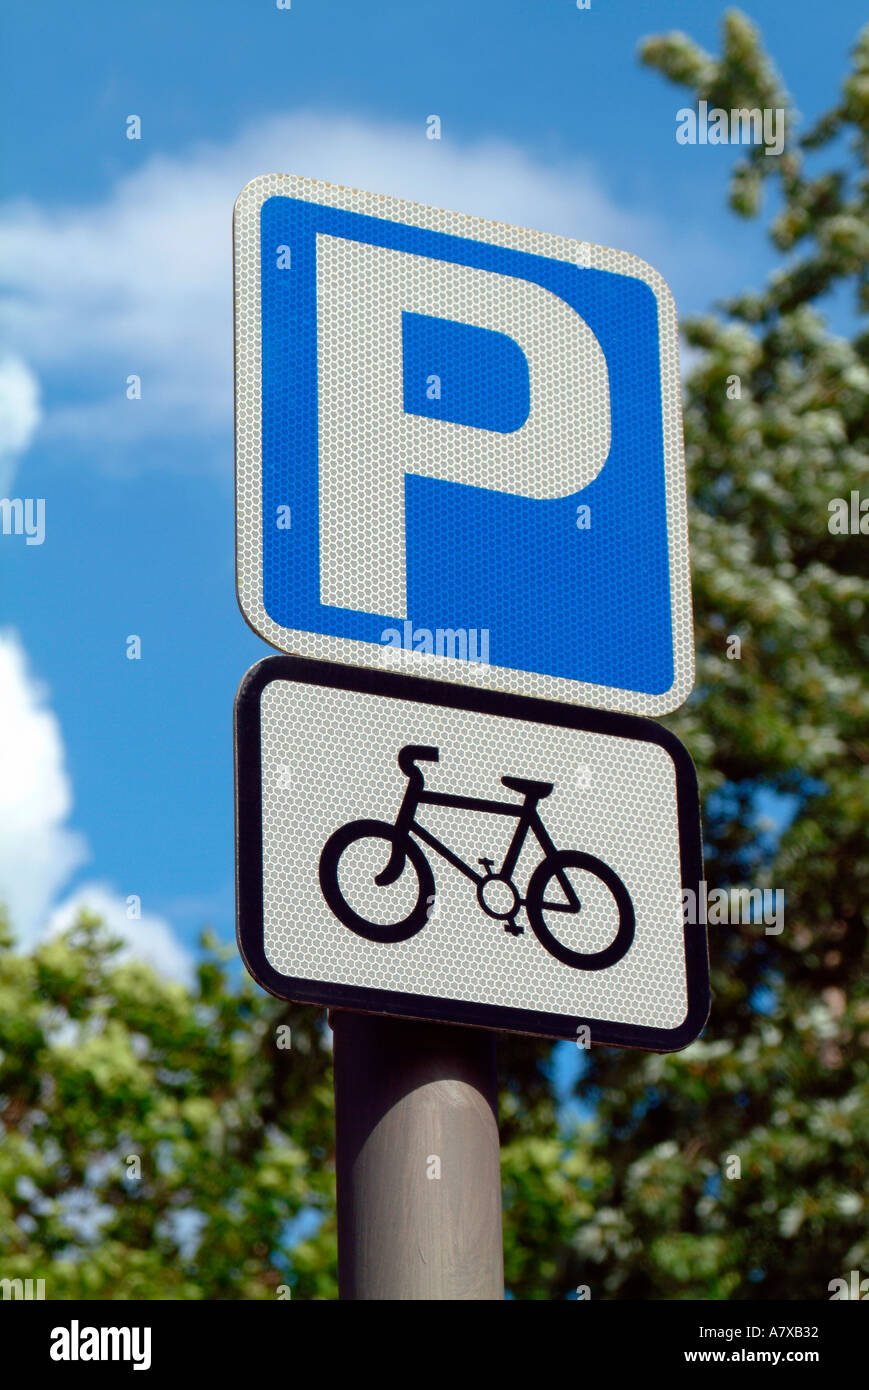 Cycle parking sign Stock Photo